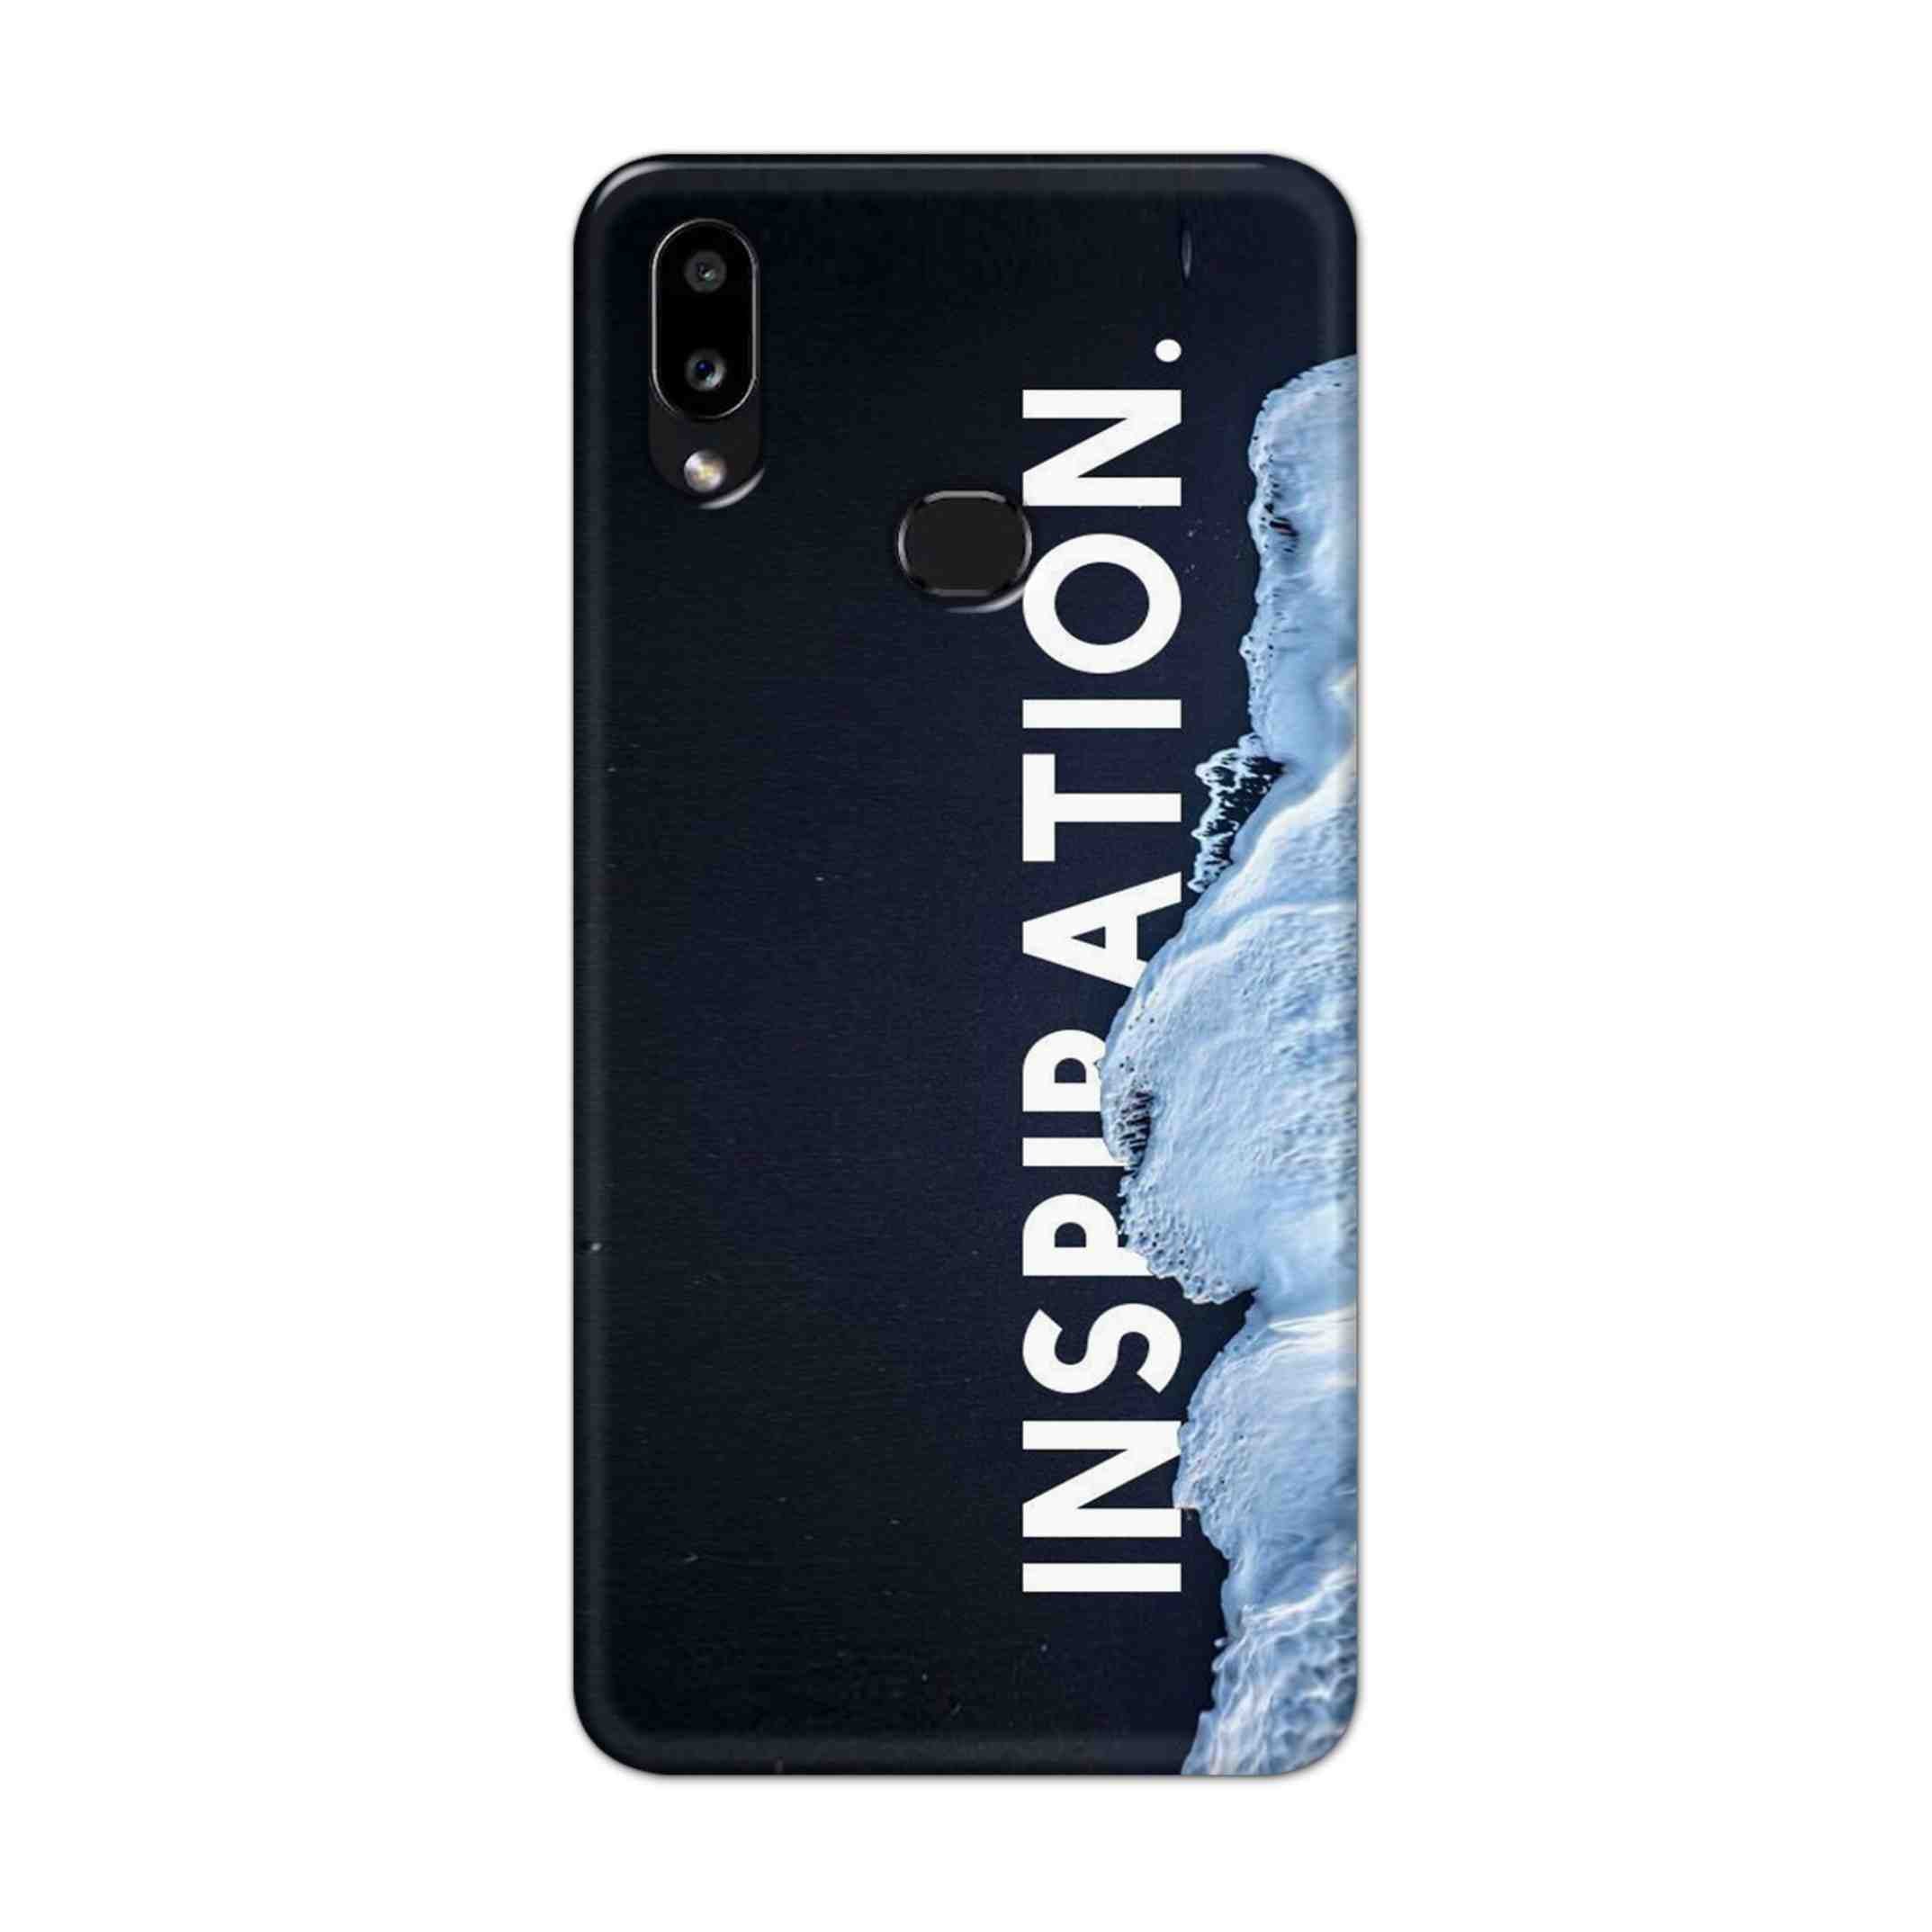 Buy Inspiration Hard Back Mobile Phone Case Cover For Samsung Galaxy M01s Online